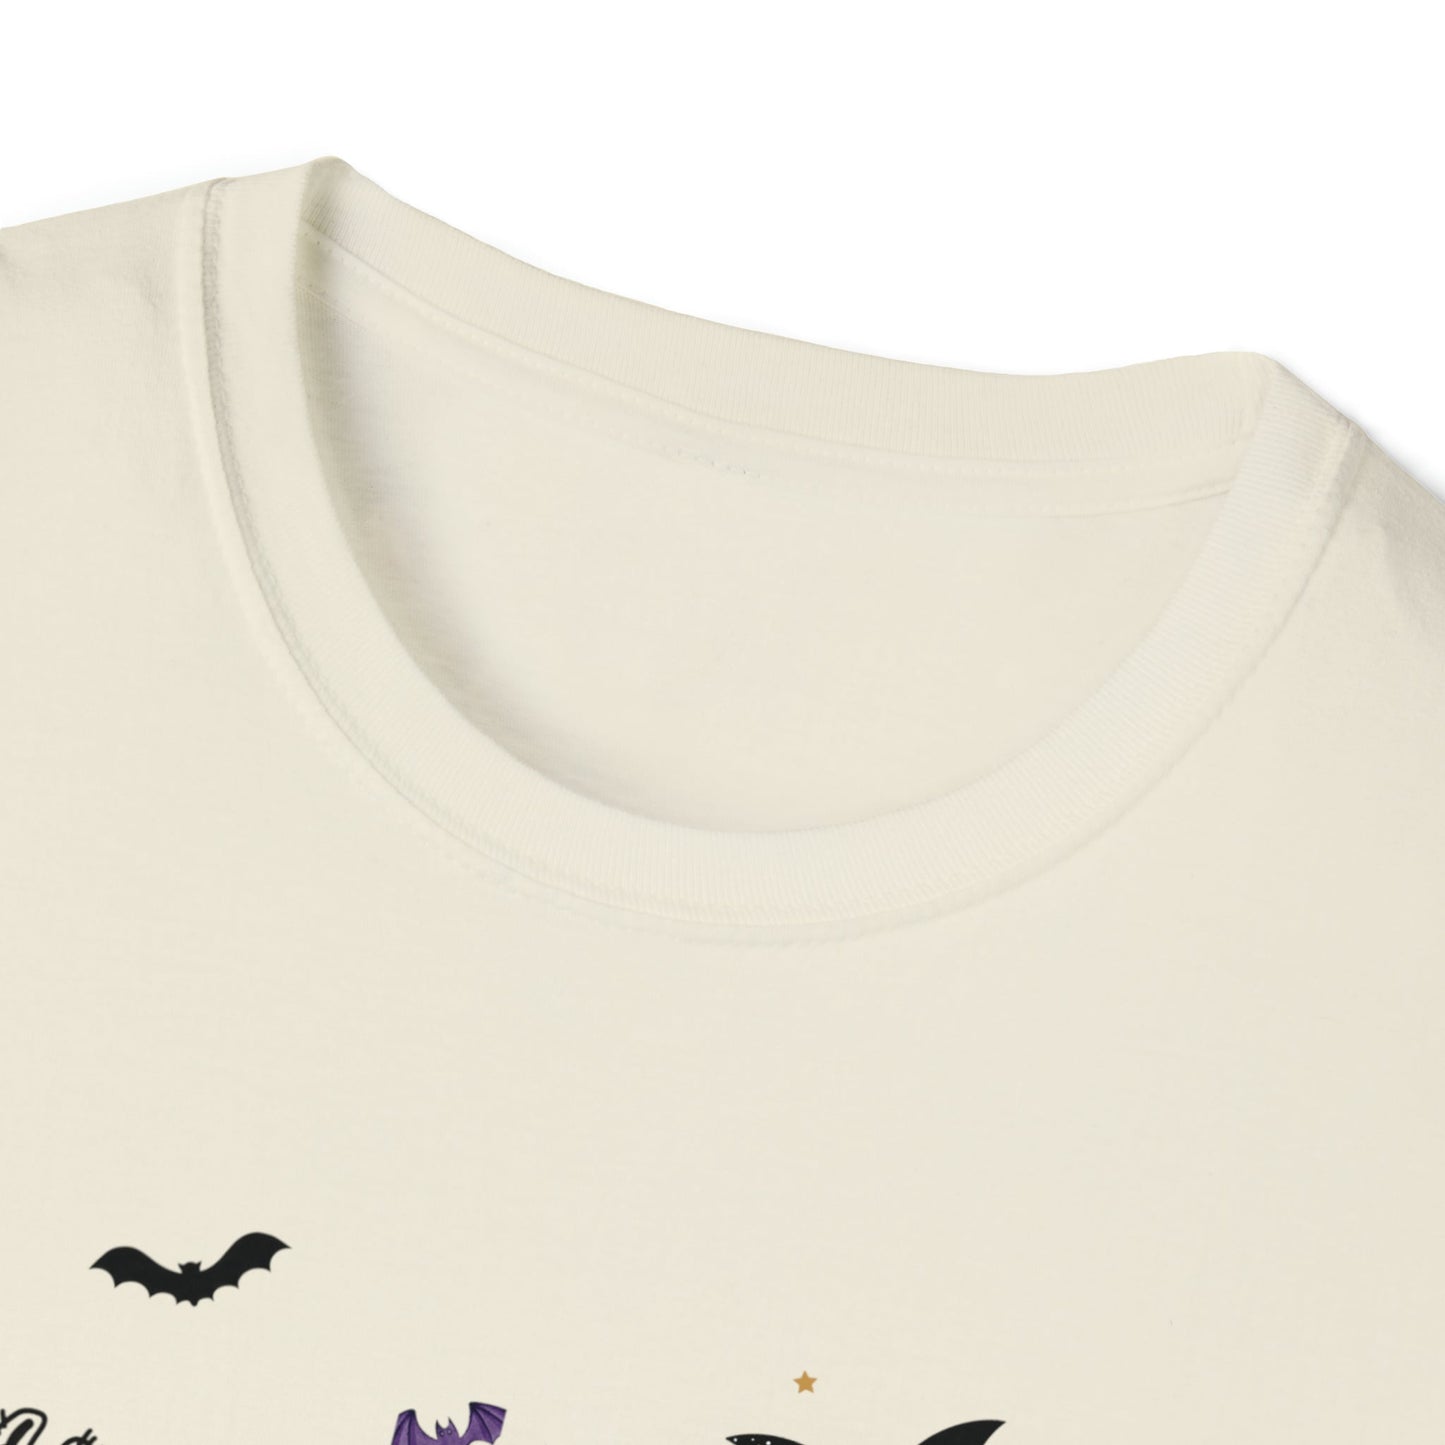 Get trendy with Spooky Drinks  T-Shirt - T-Shirt available at Good Gift Company. Grab yours for $21.95 today!